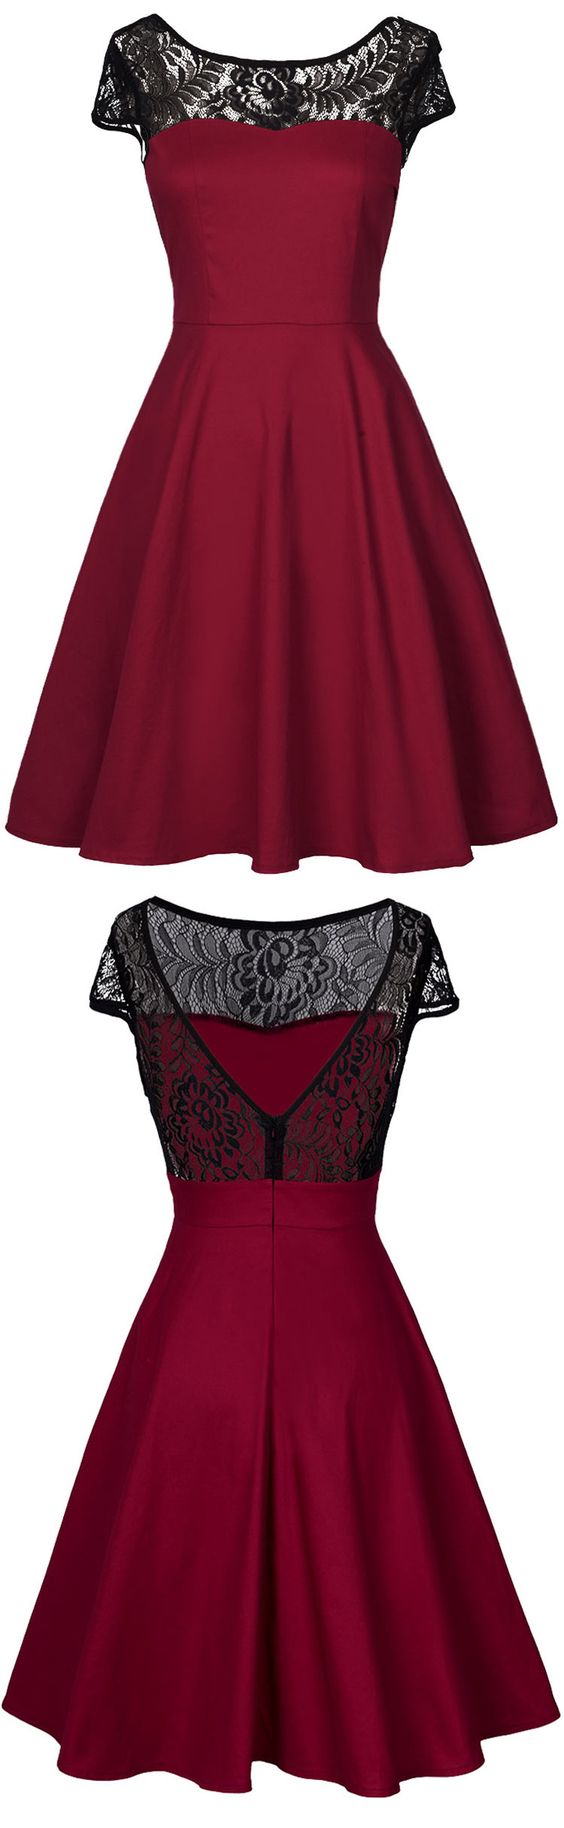 Stunning New Homecoming Dresses,Dark Red Satin Short Party Gowns, Short ...